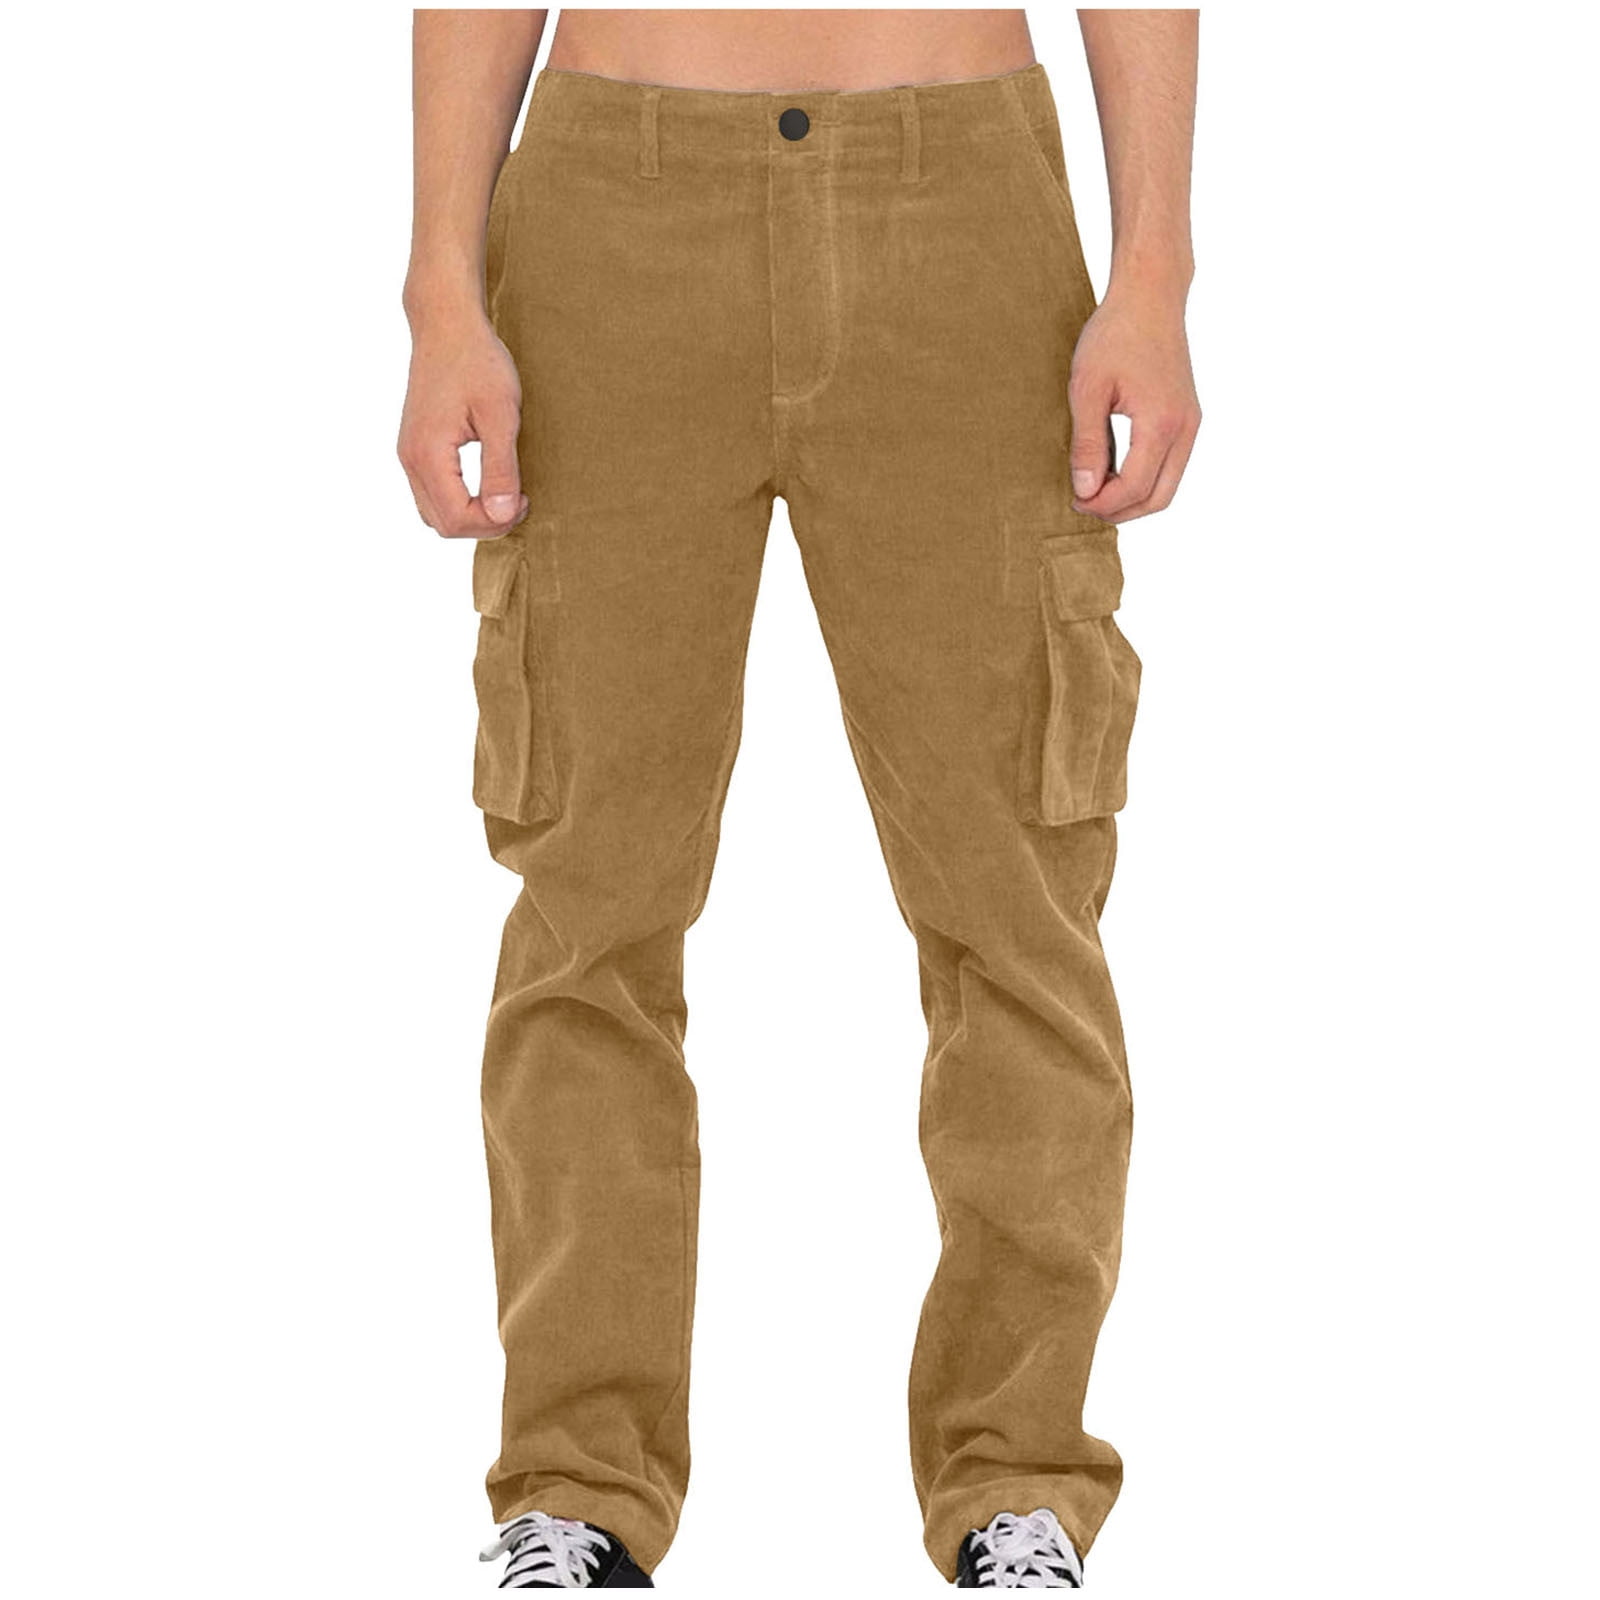 Hfyihgf Mens Corduroy Cargo Pants Athletic Casual Loose Straight-Fit  Lightweight Workwear Sport Outdoor Trousers with Multi Pockets(Khaki,XL) 